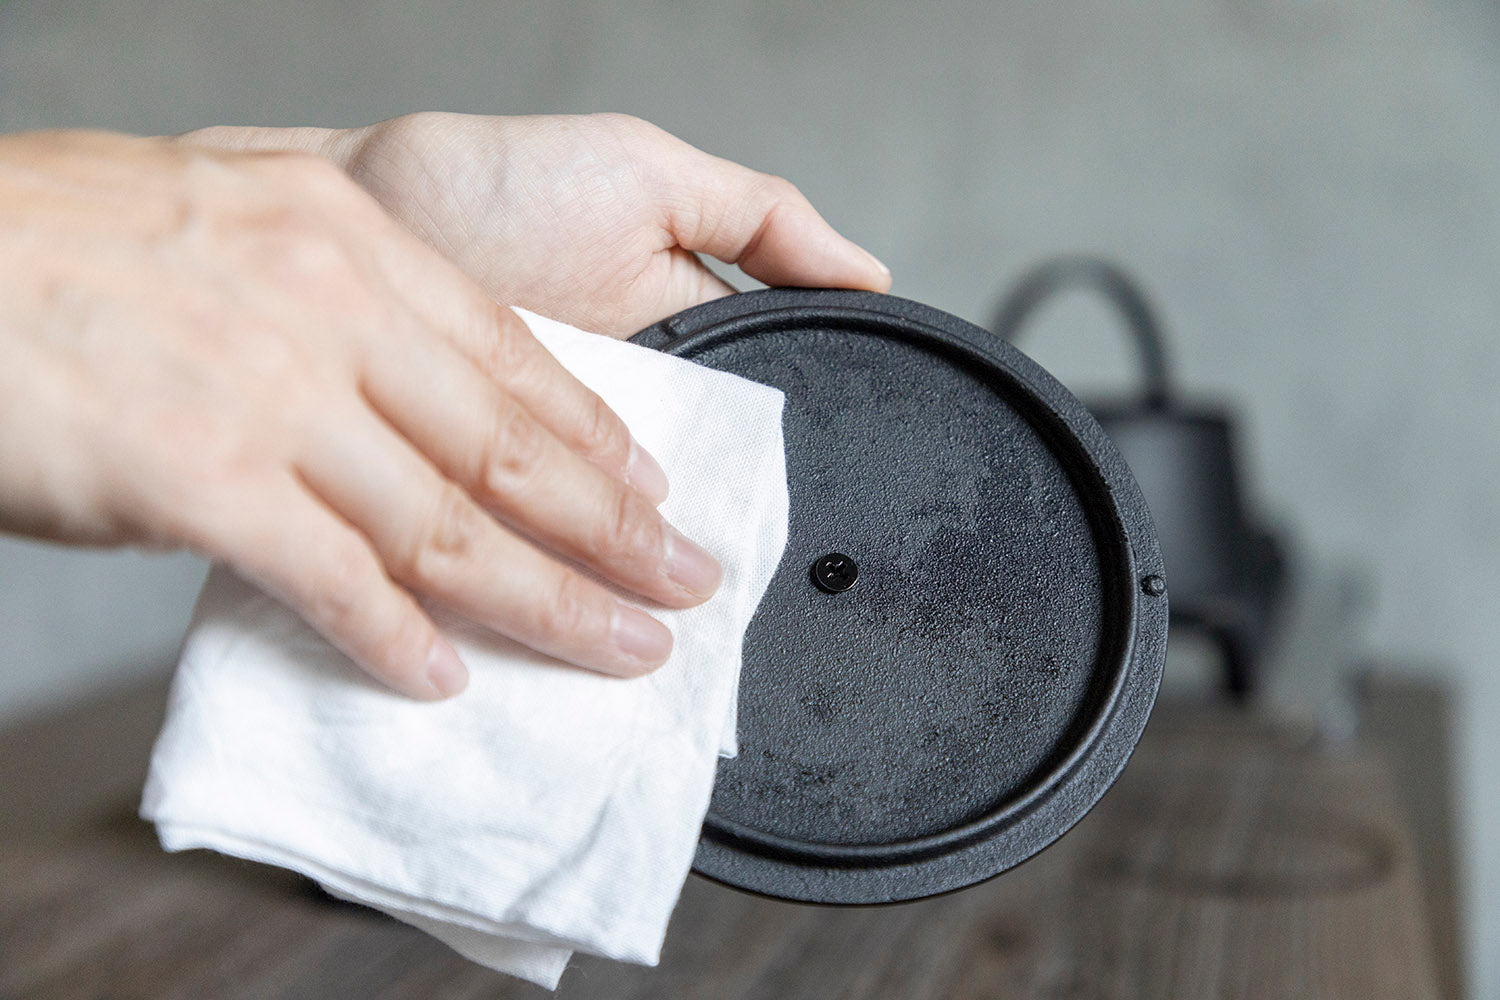 Wiping the lid of an iron kettle or teapot